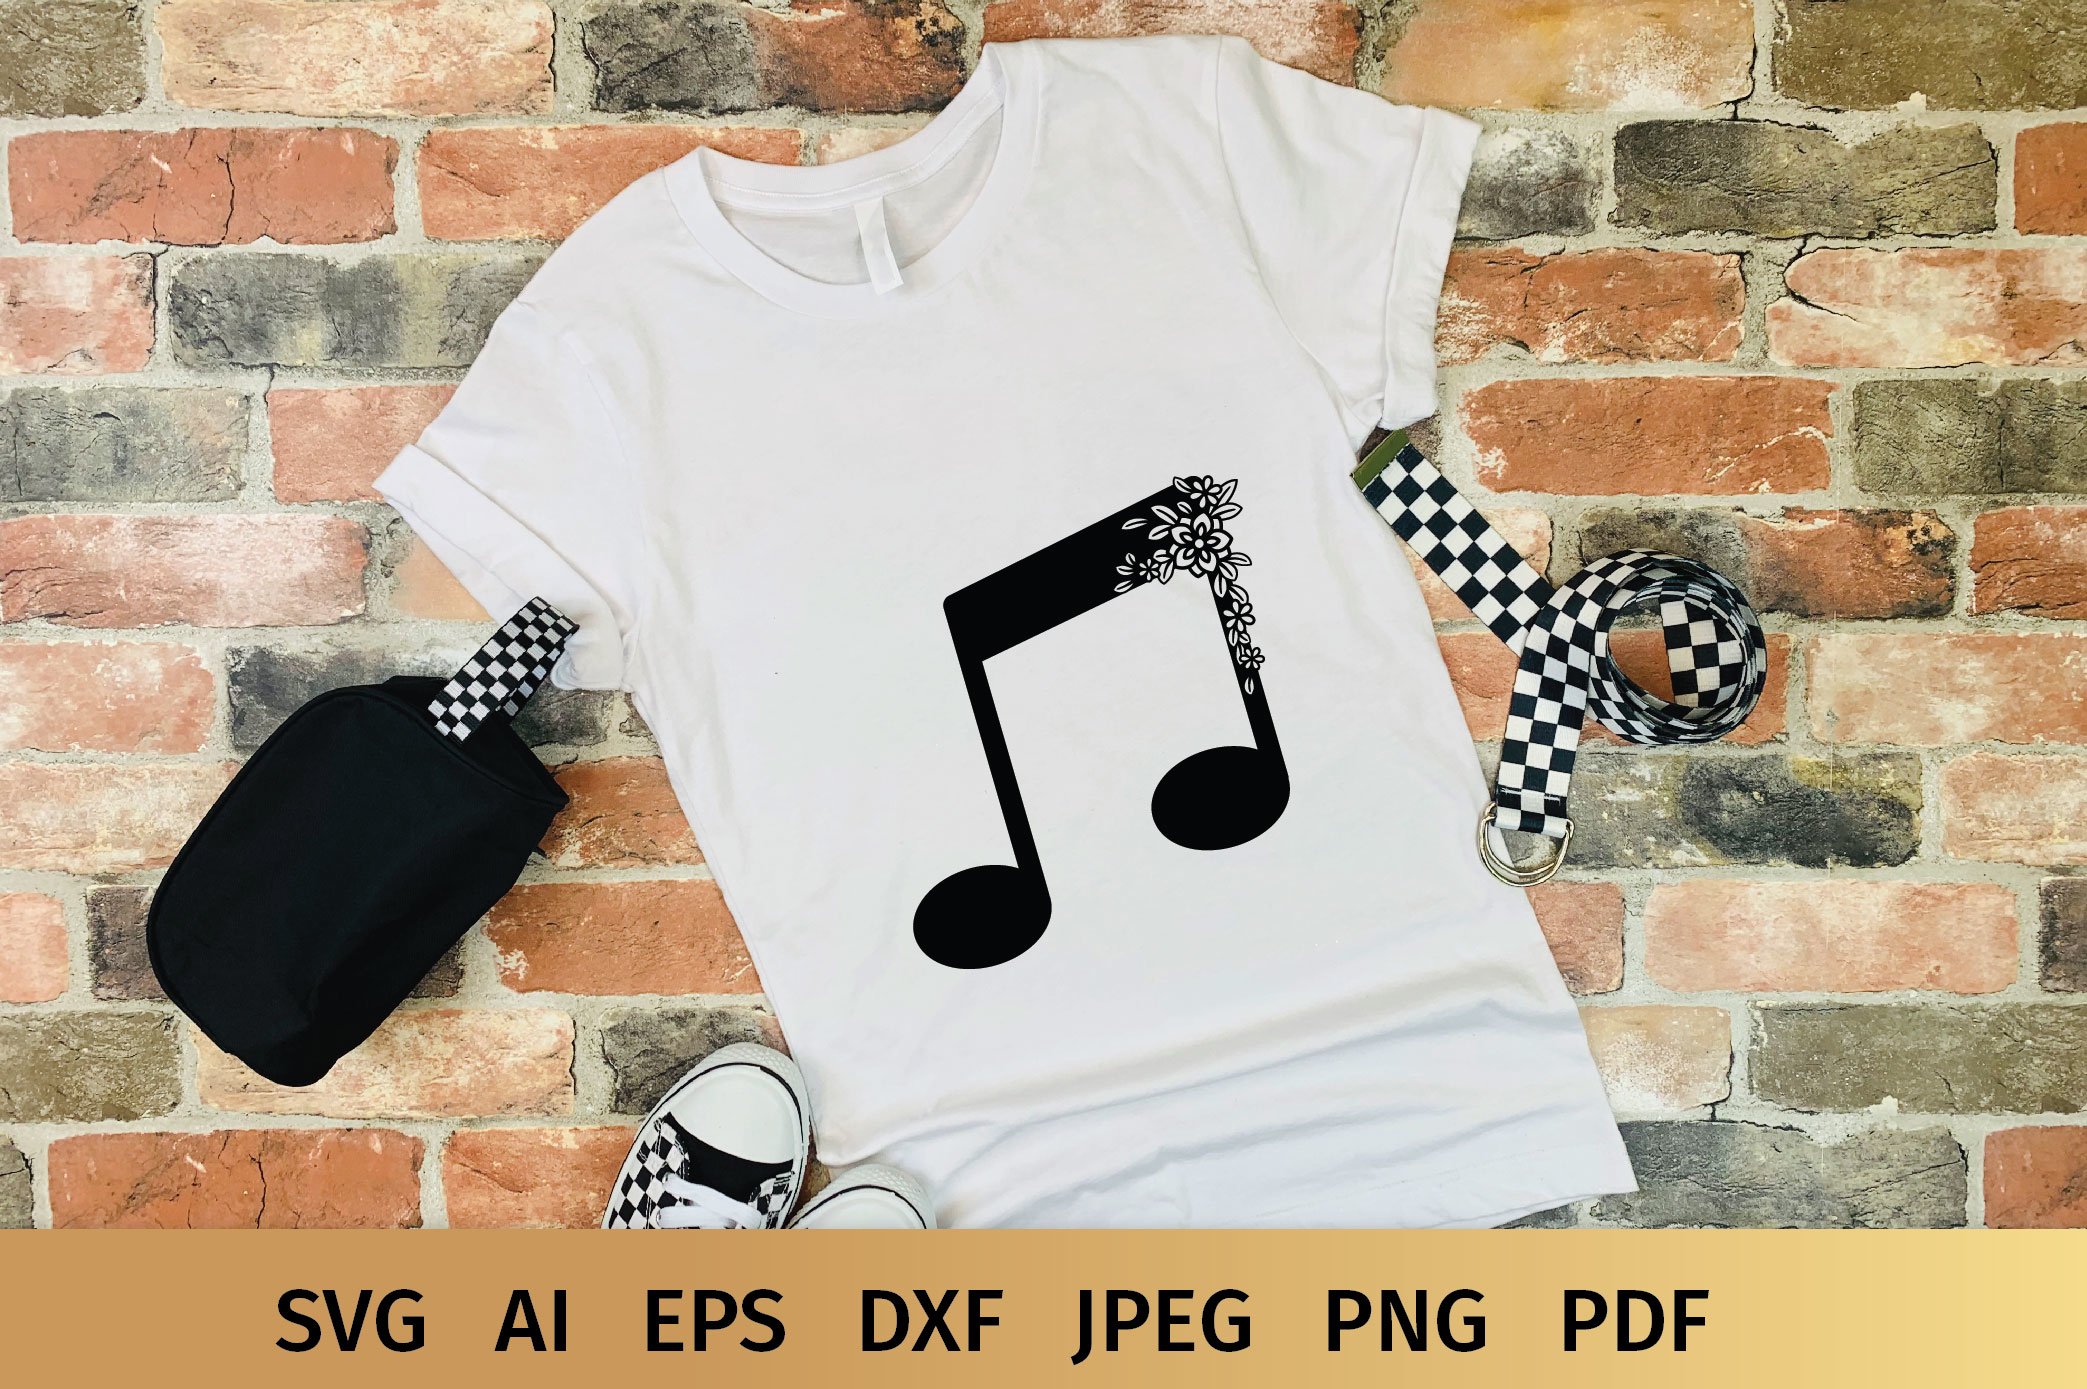 Classic white t-shirt with black music note.